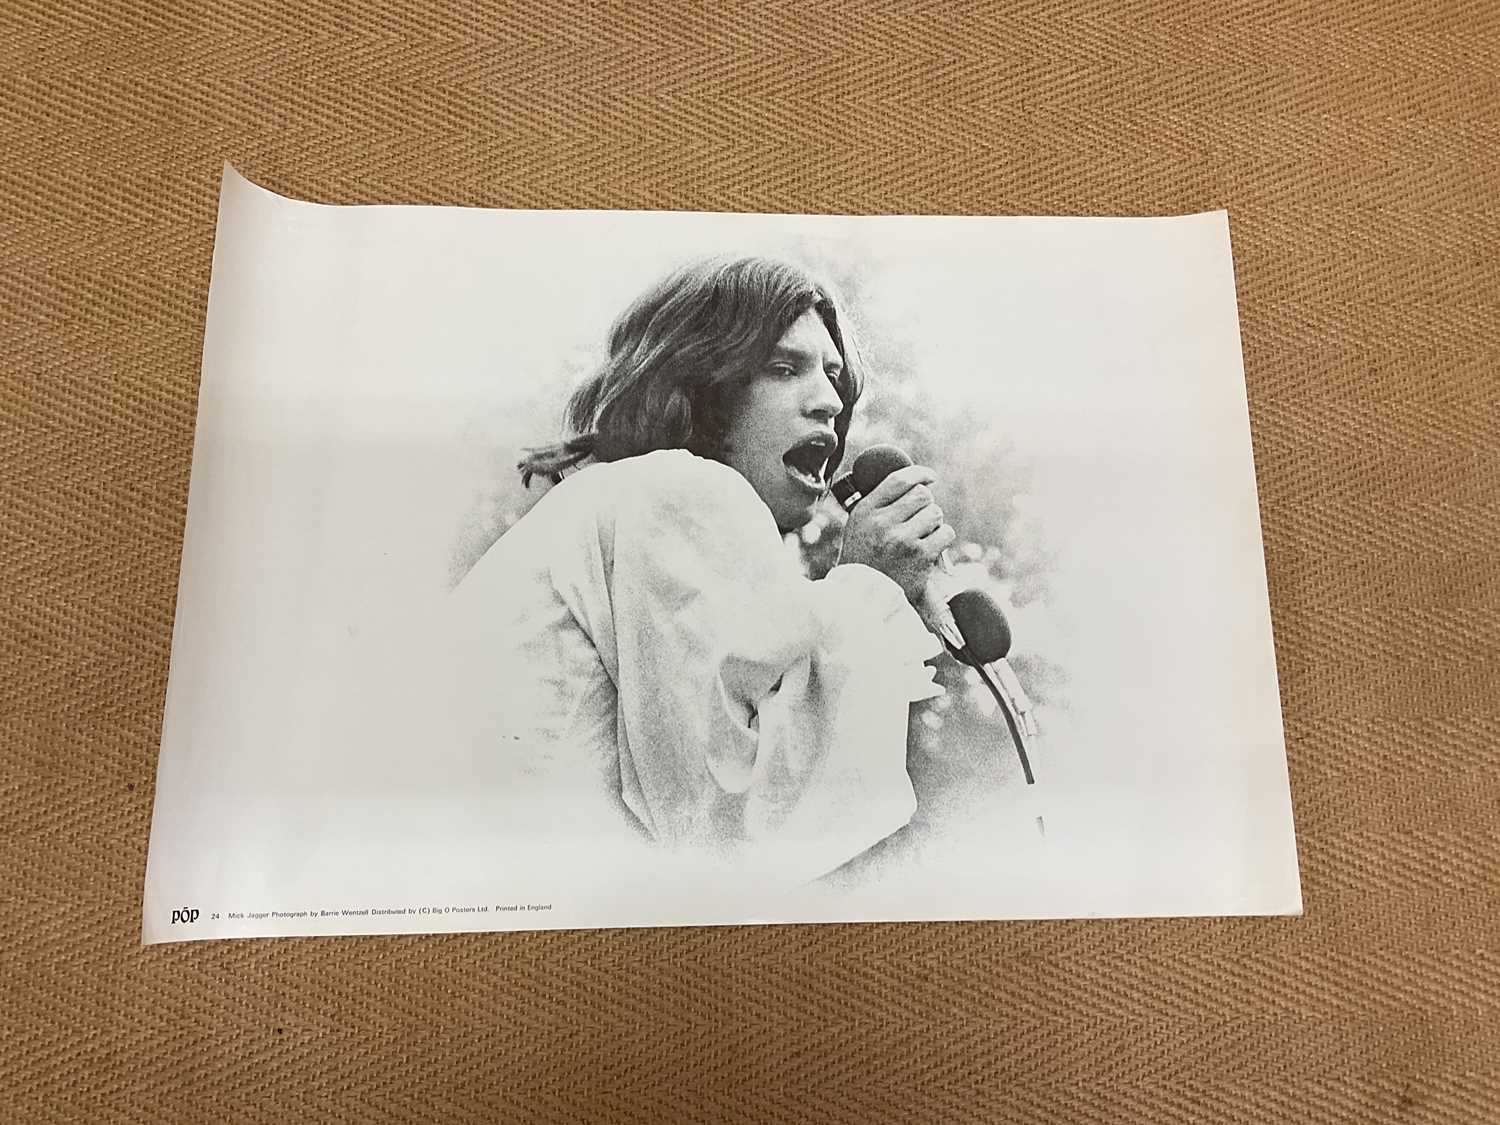 MICK JAGGER; three original black and white posters of The Rolling Stones singer, published by Big O